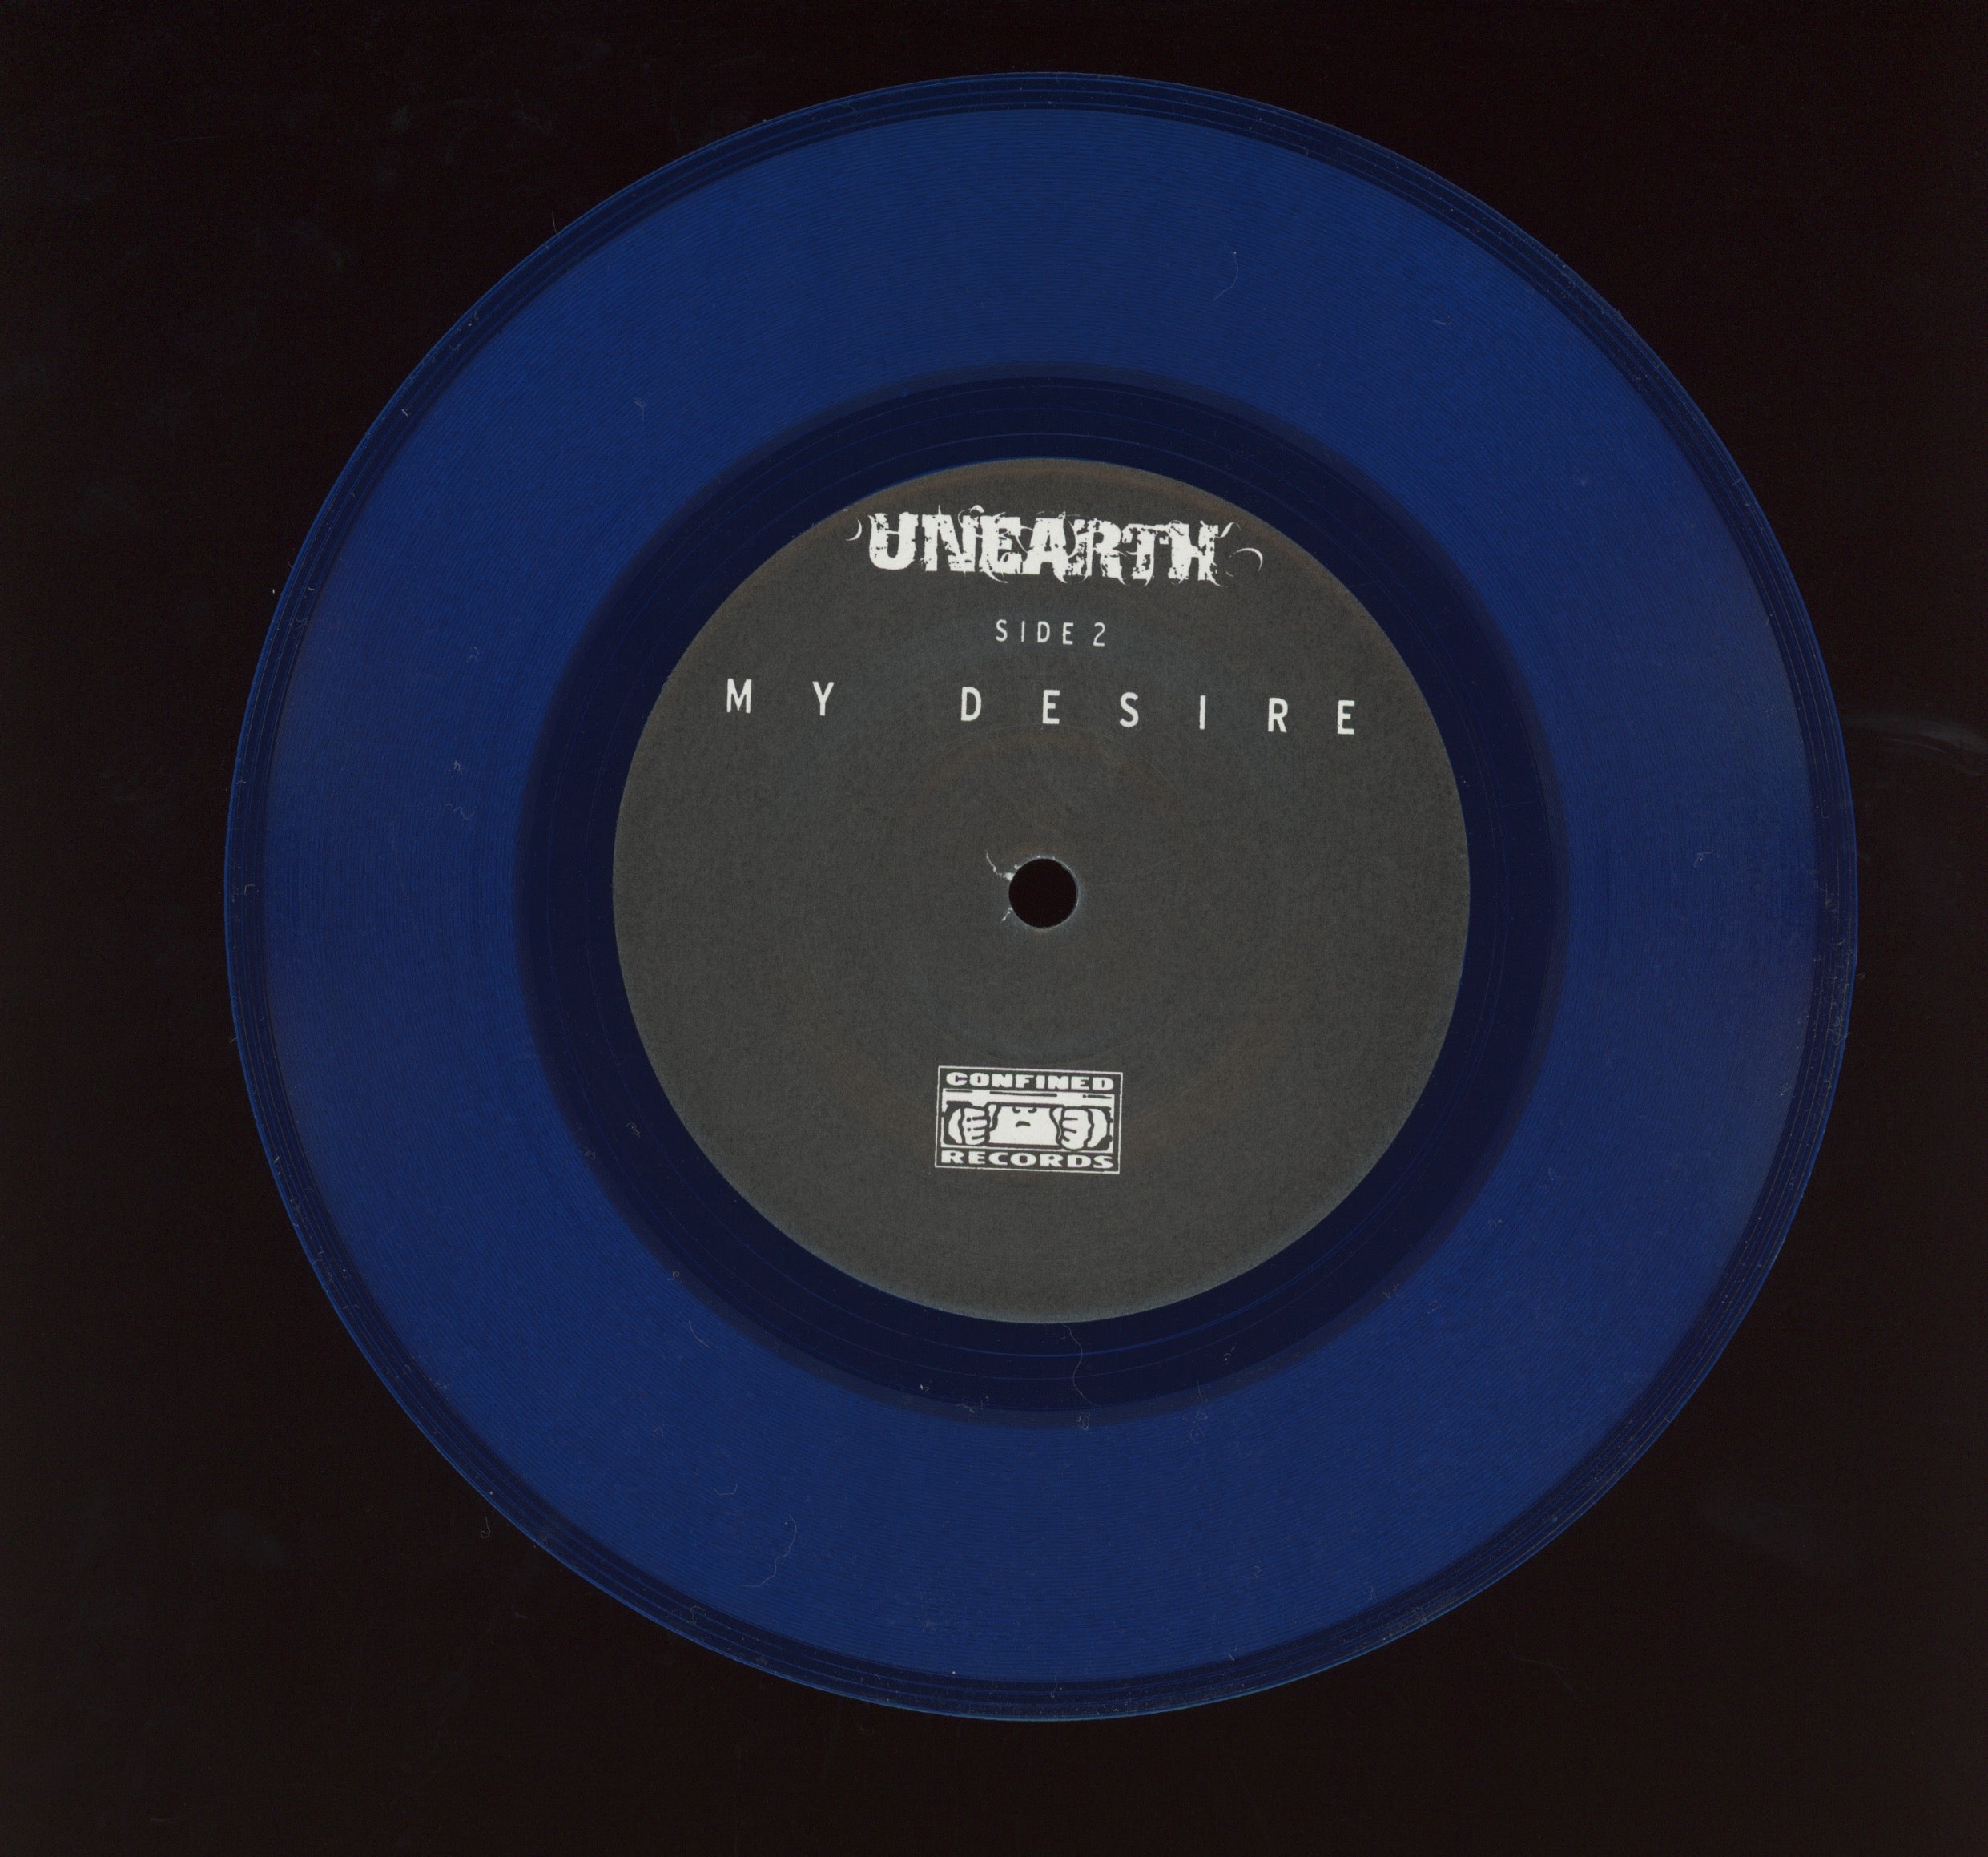 Unearth - Endless / My Desire on Confined Blue Transparent 7"